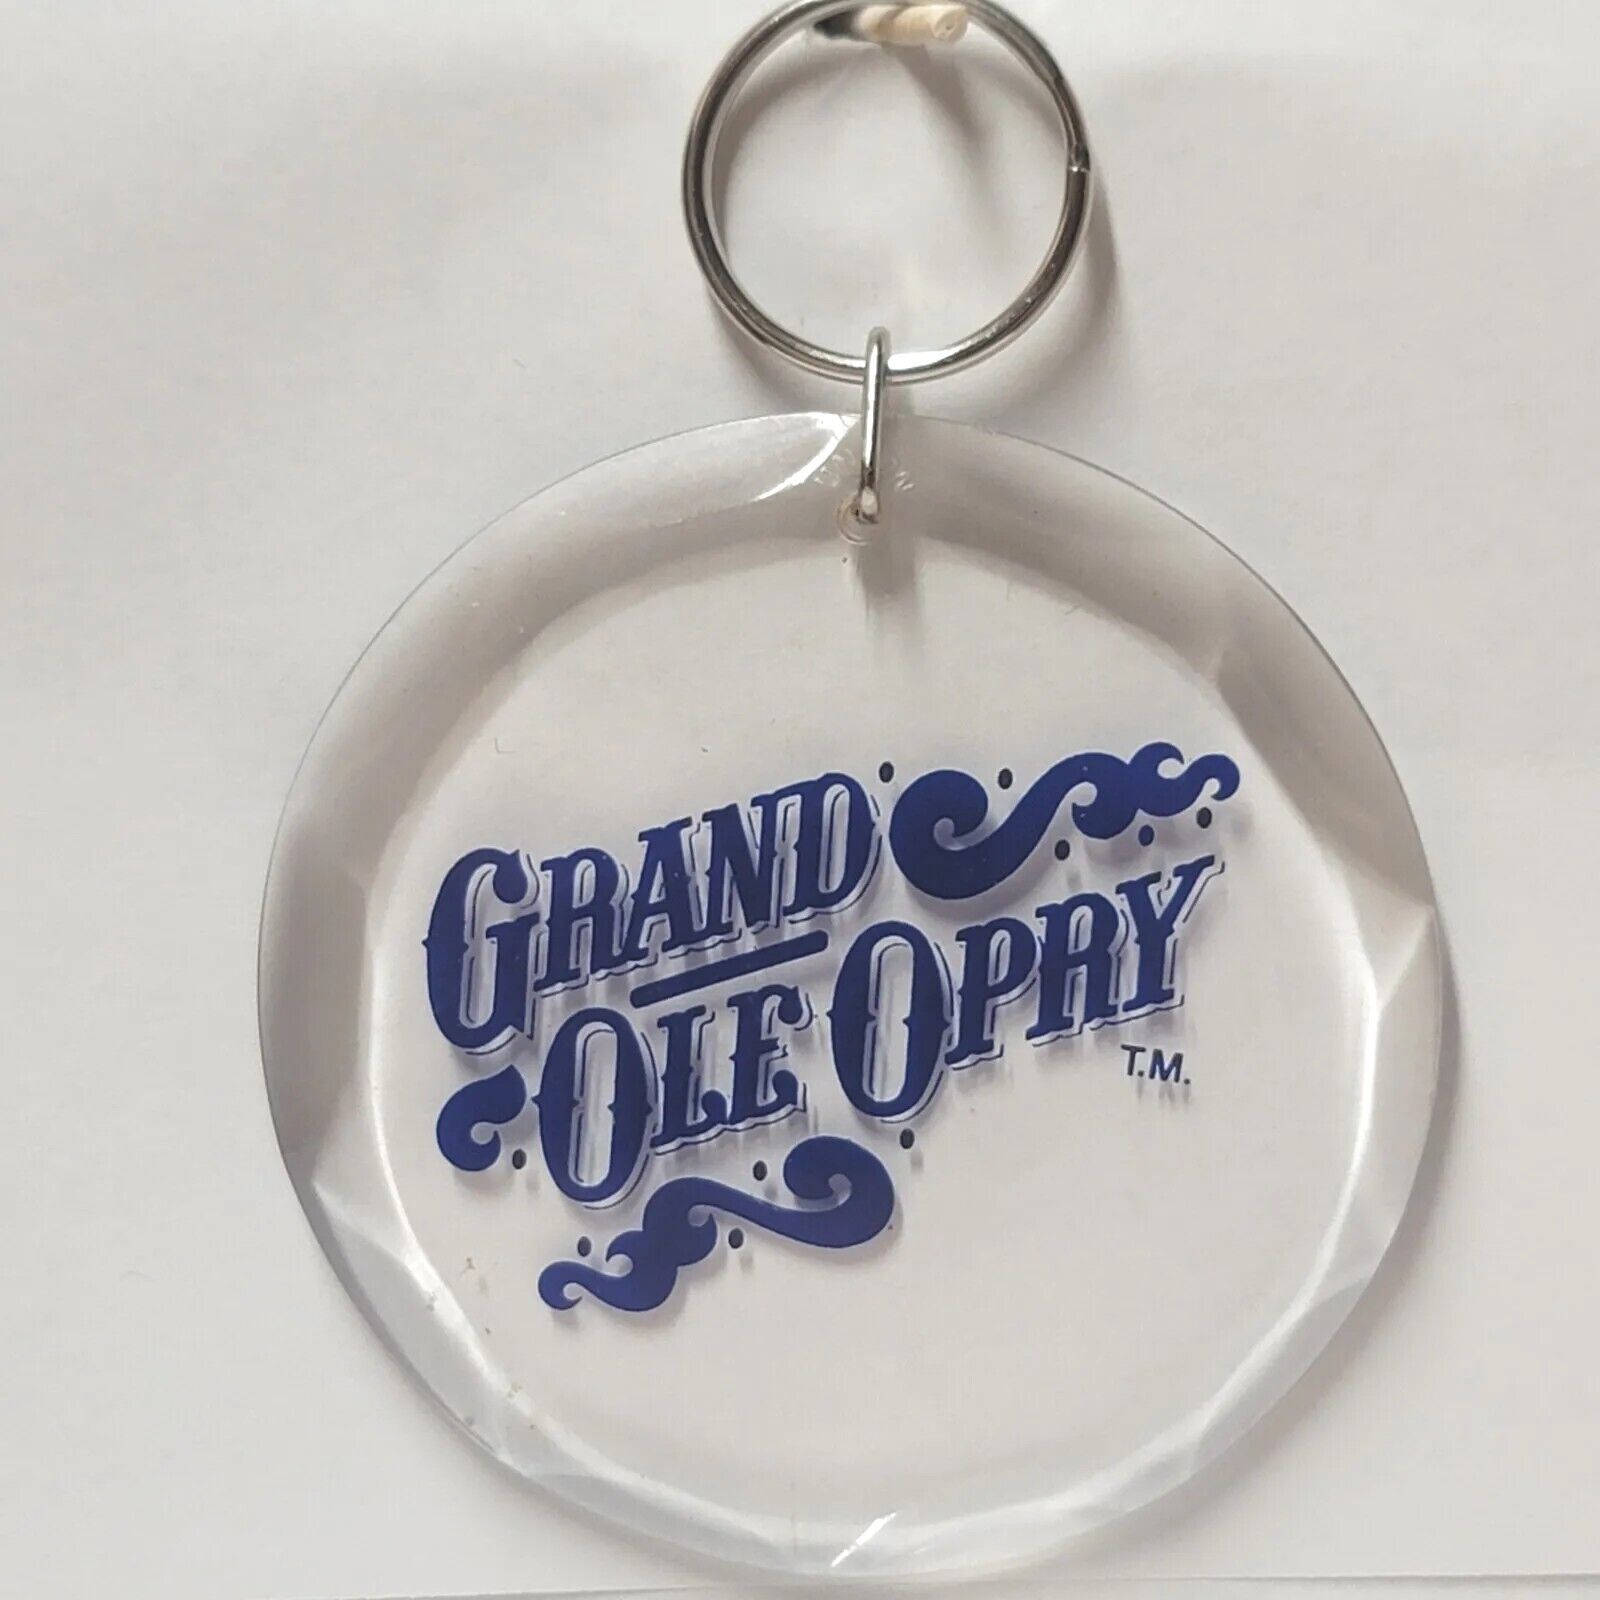 Vintage 80s Keychain Grand Ole Opry Key Chain Ring 1980s Nashville Tennessee Lrg